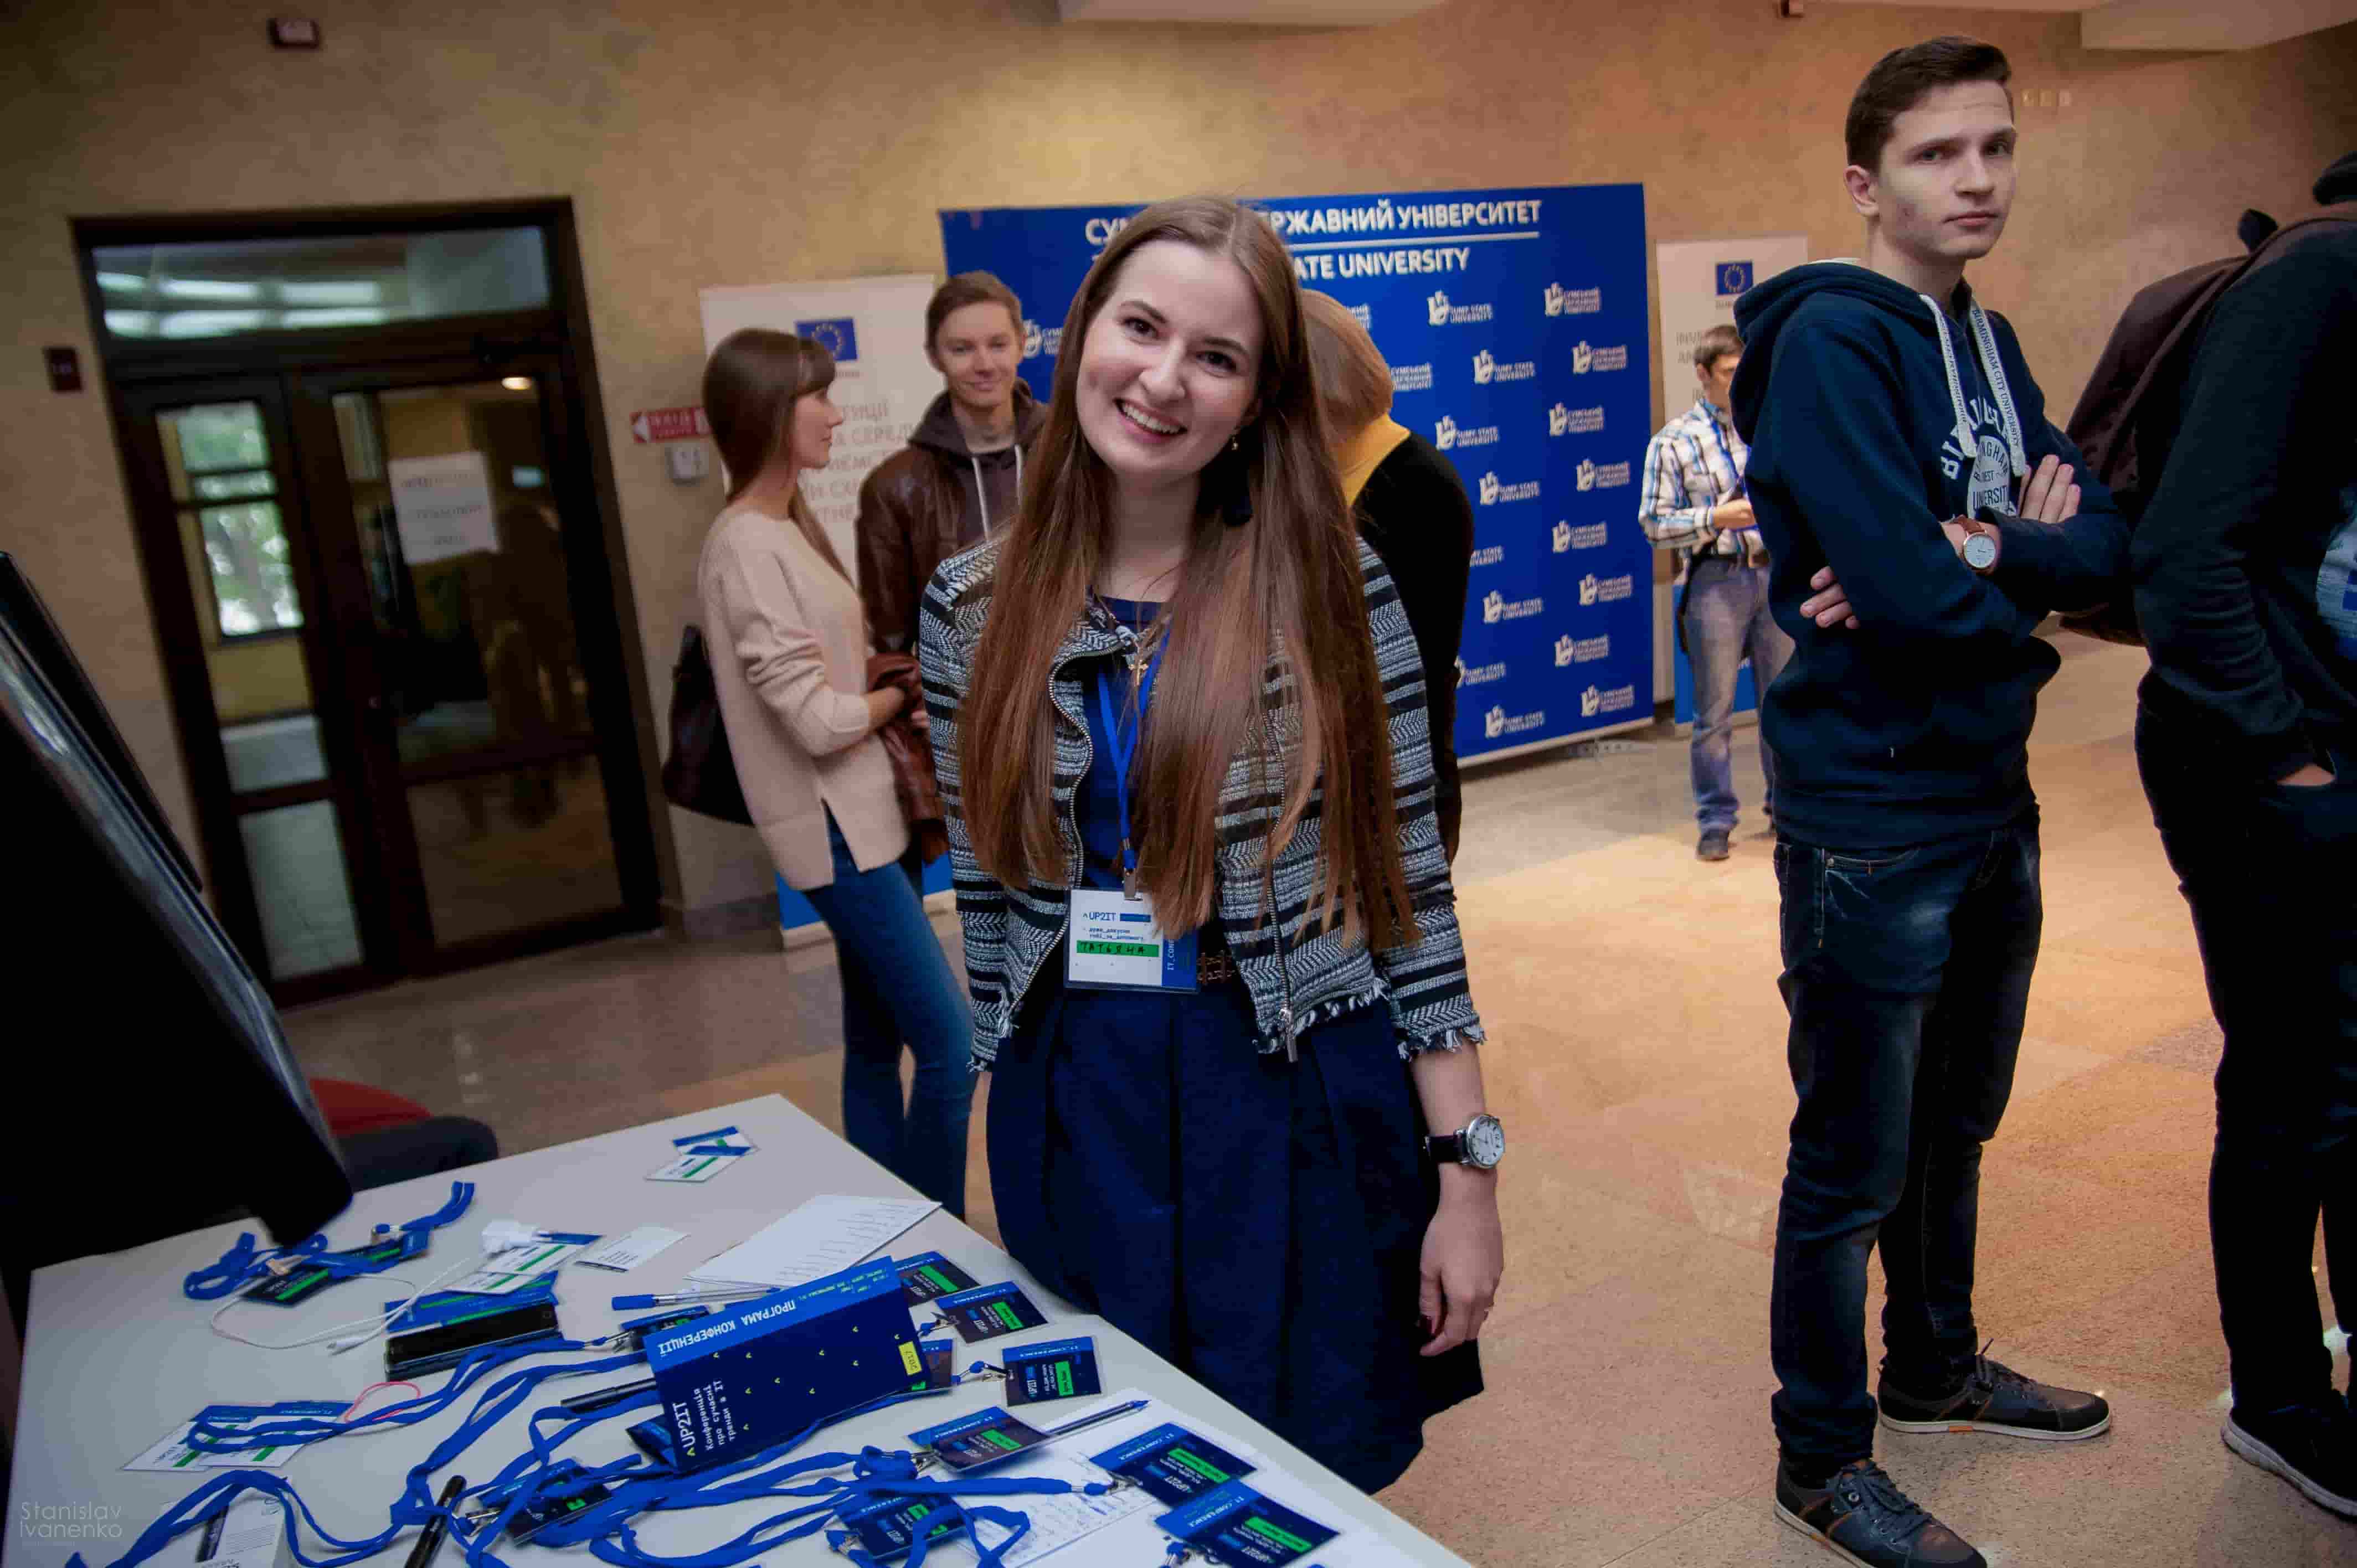 Volunteer at UP2IT Conference